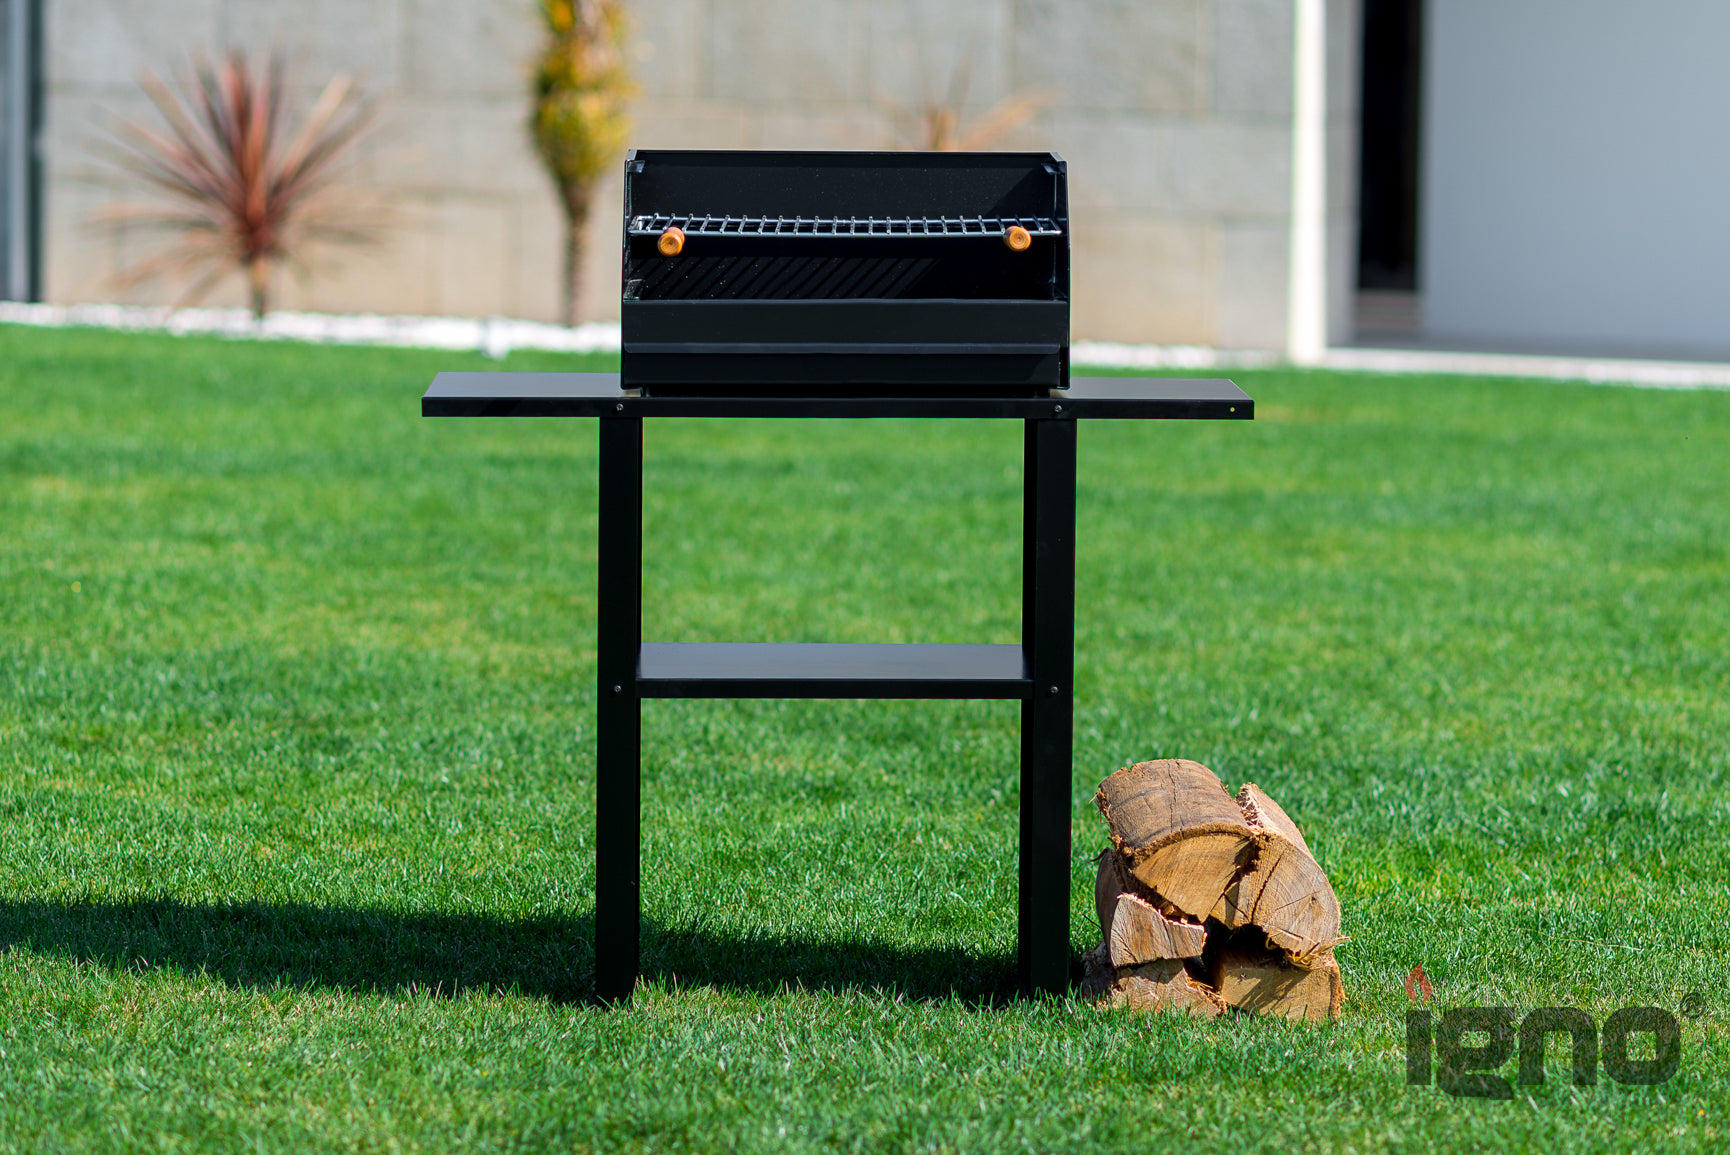 Extra Grill for Barbecue